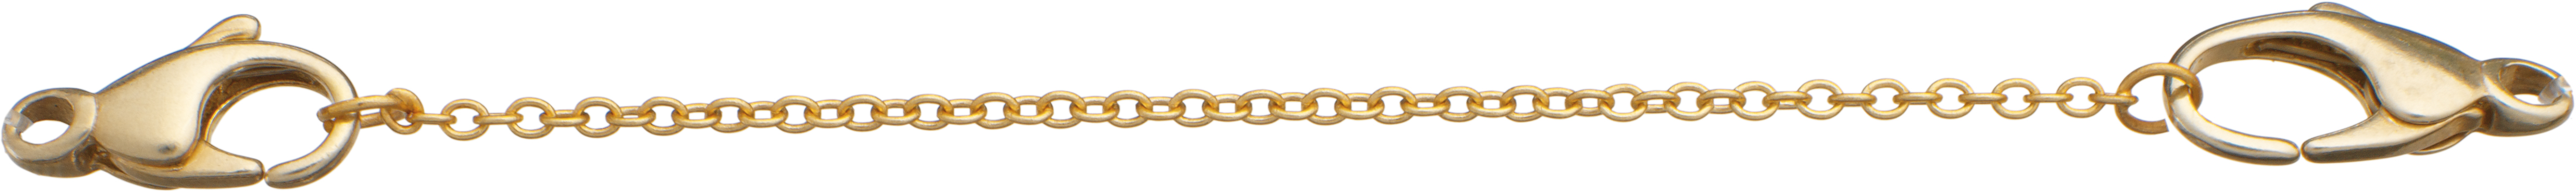 Safety chain anchor double length 70,00mm, with open jump rings